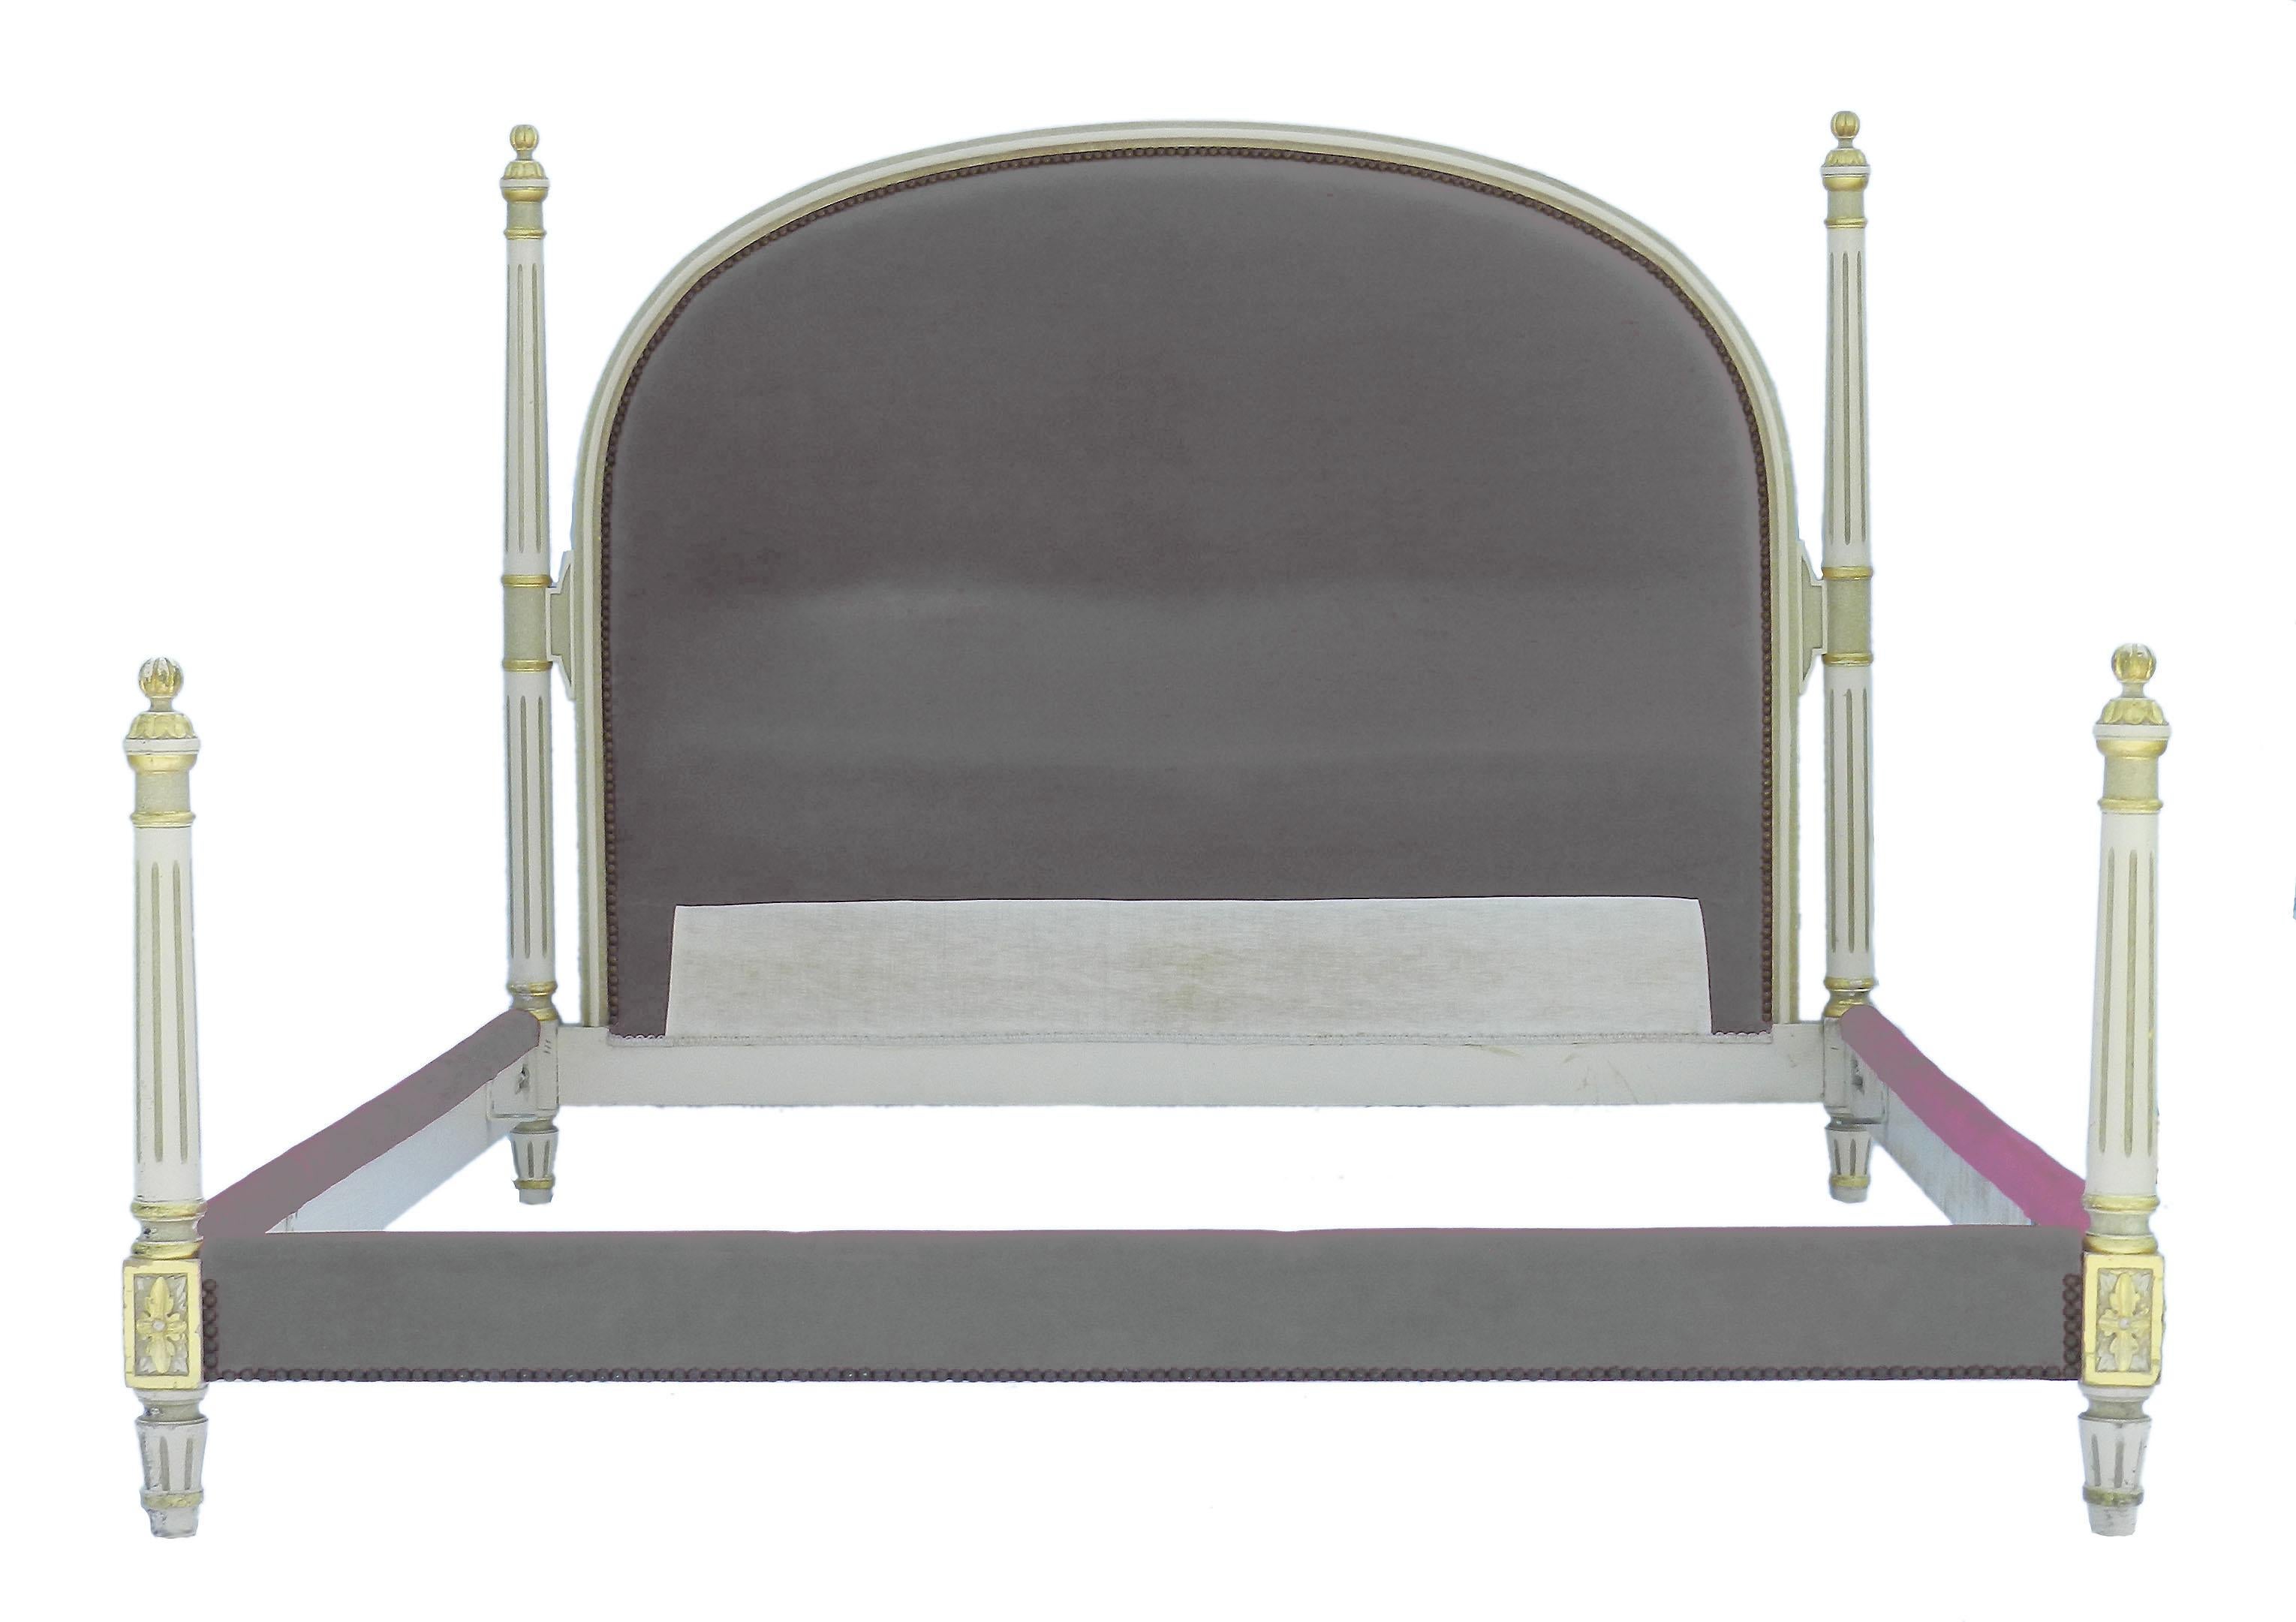 French bed US Queen UK King Louis XVI 
The bed has been shown is different colors, the original color is red velvet and needs to be changed
The patina on this is very good gloriously distressed
The bed is clean and good quality sound, solid in very